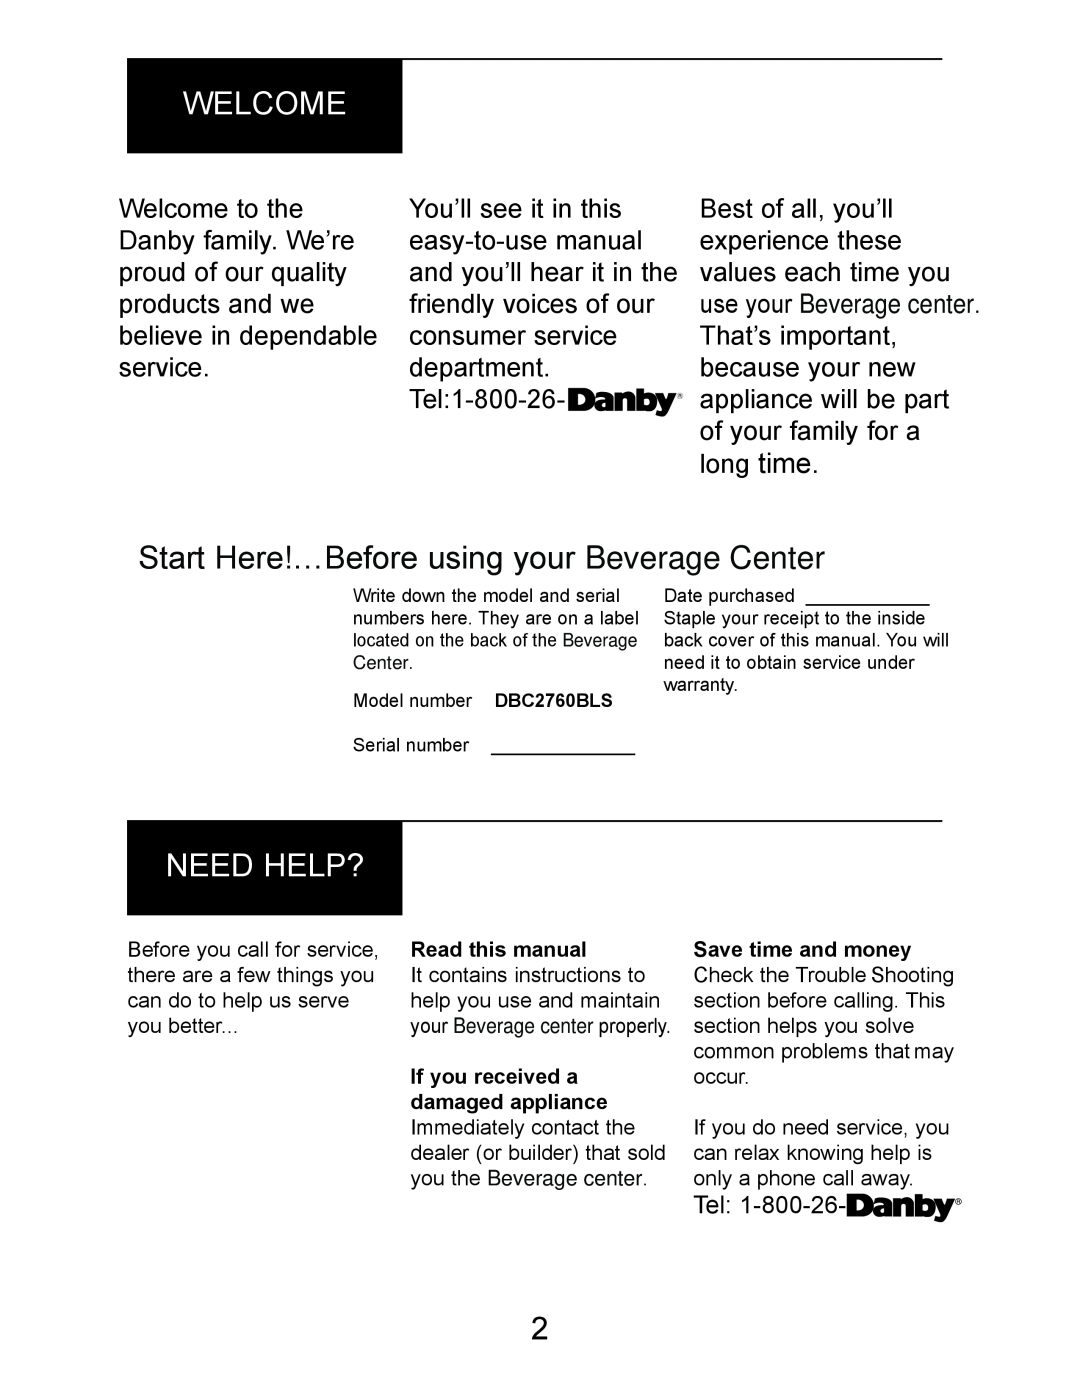 Danby DBC2760BLS manual Welcome, Start Here!…Before using your Beverage Center, Need Help? 